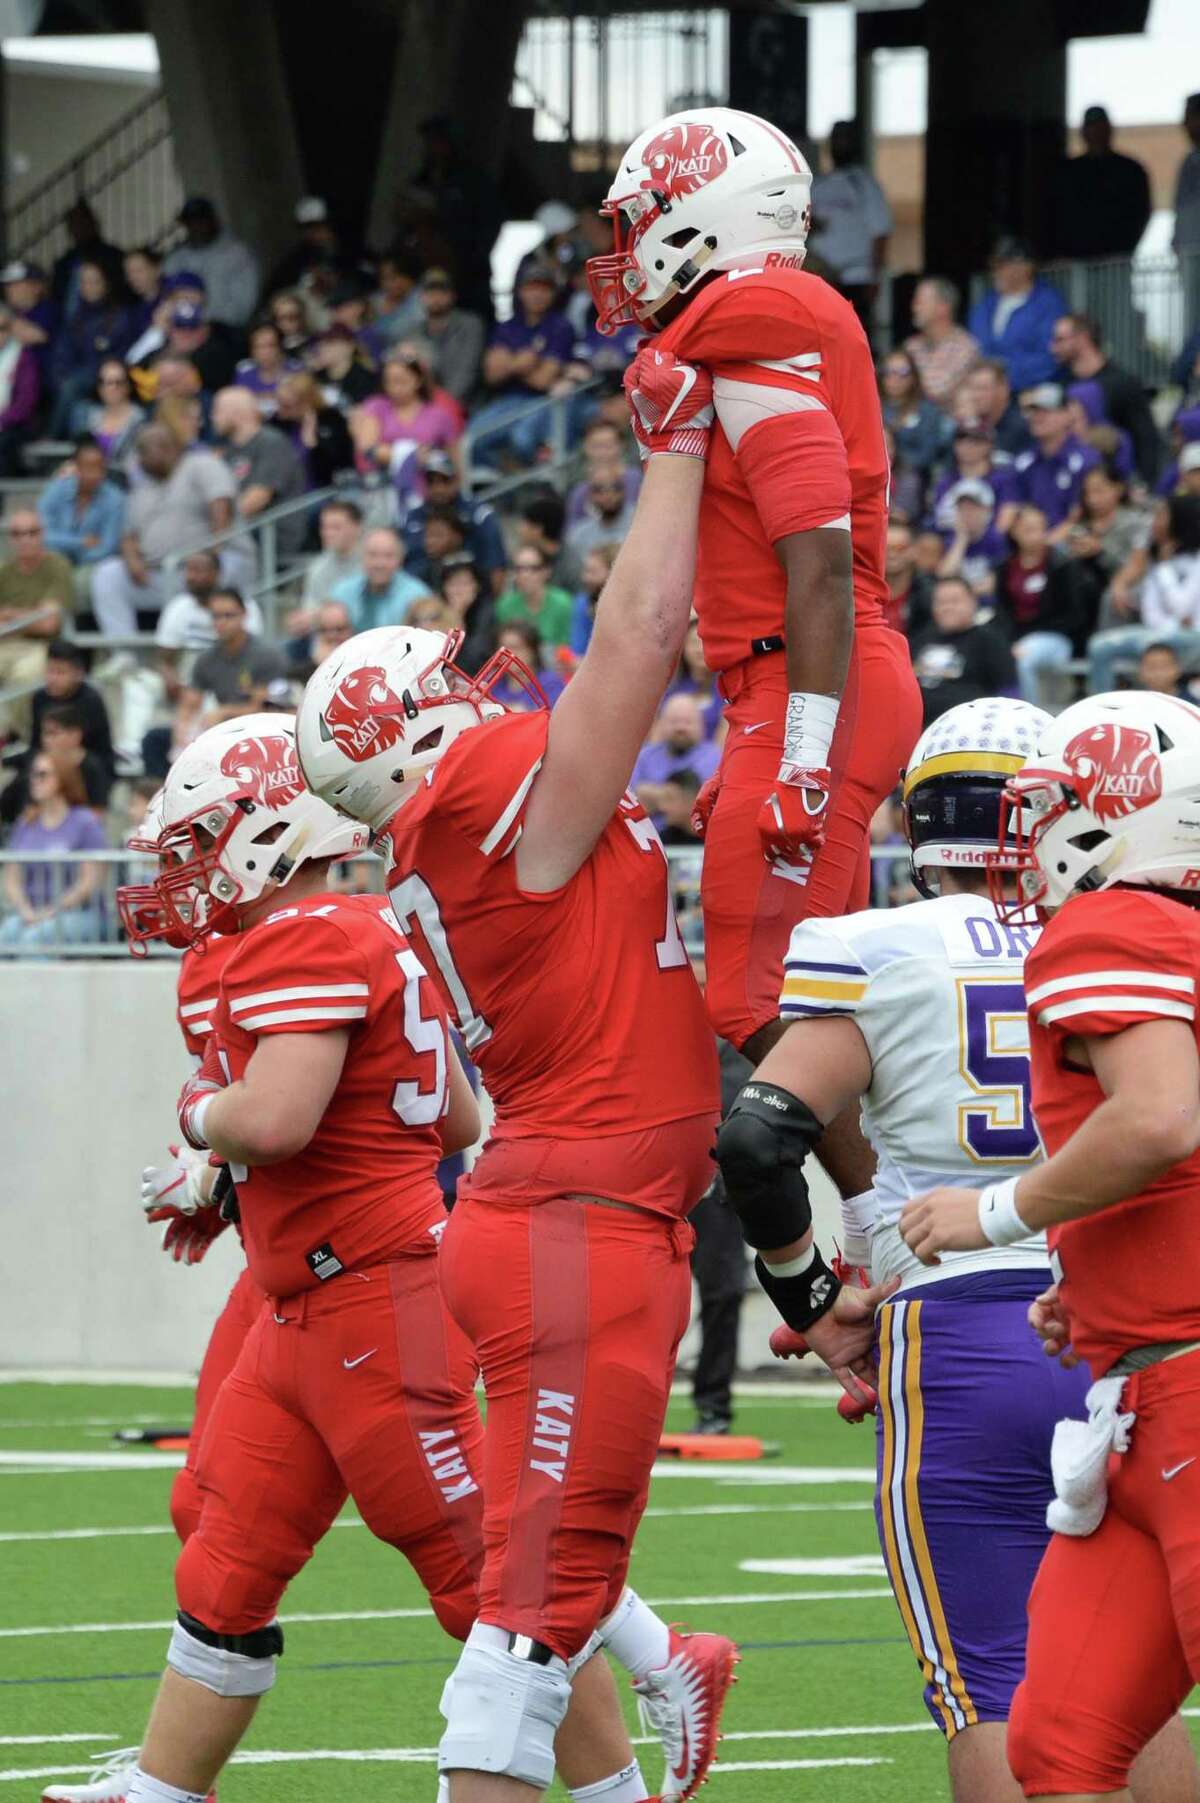 Cole Birmingham (77) of Katy hoists Deondrick Glass (2) in the air to celebrate his touchdown in the first quarter of a Class 6A Div. I Reg. III area-round playoff game between the Katy Tigers and the Jersey Village Falcons on Friday, November 23, 2018 at Legacy Stadium, Katy, TX.